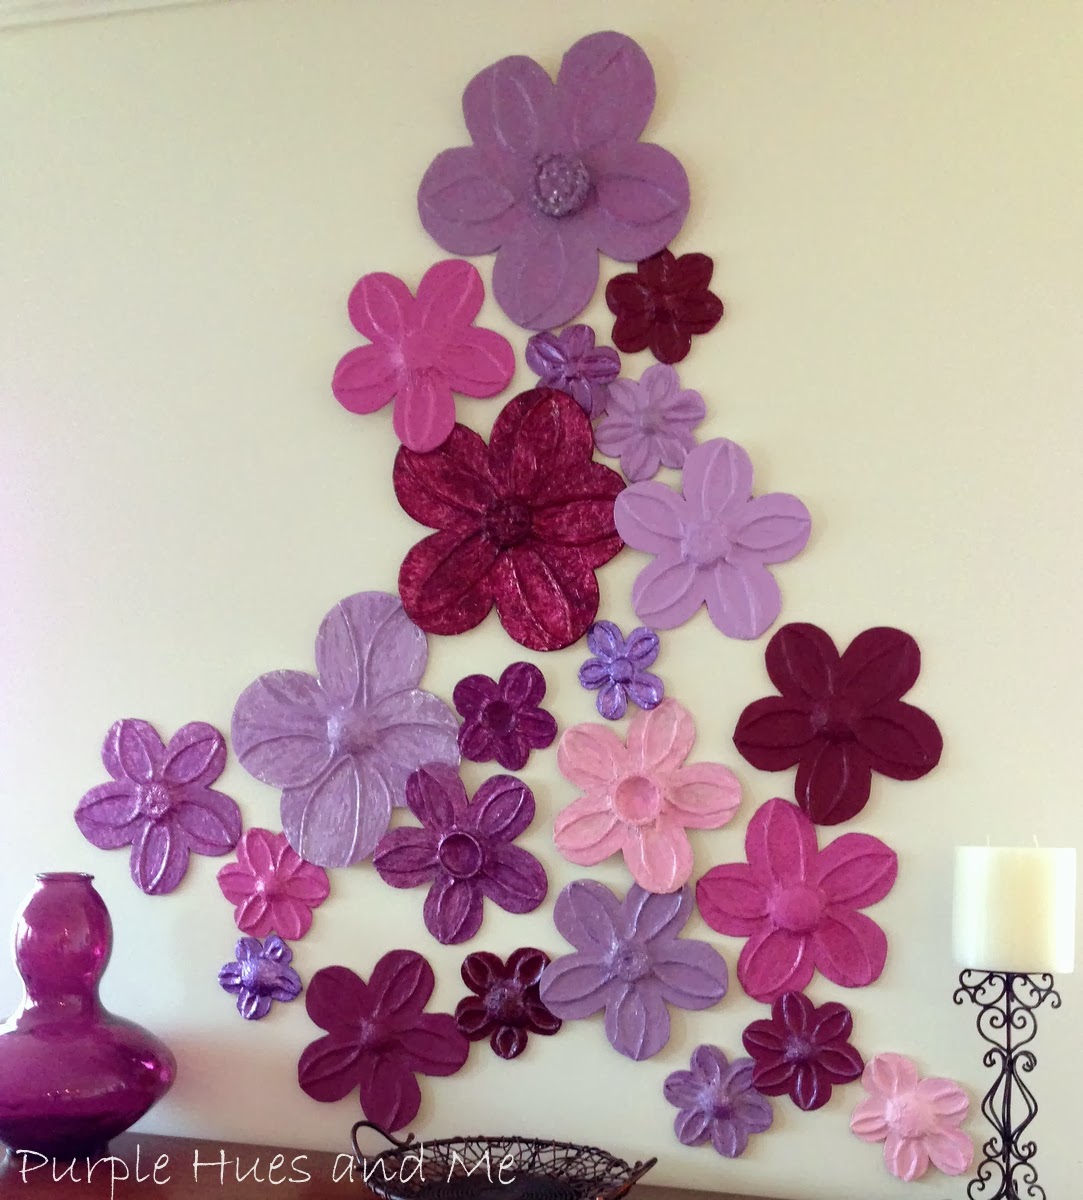  Crafting DIY Projects Decorating 